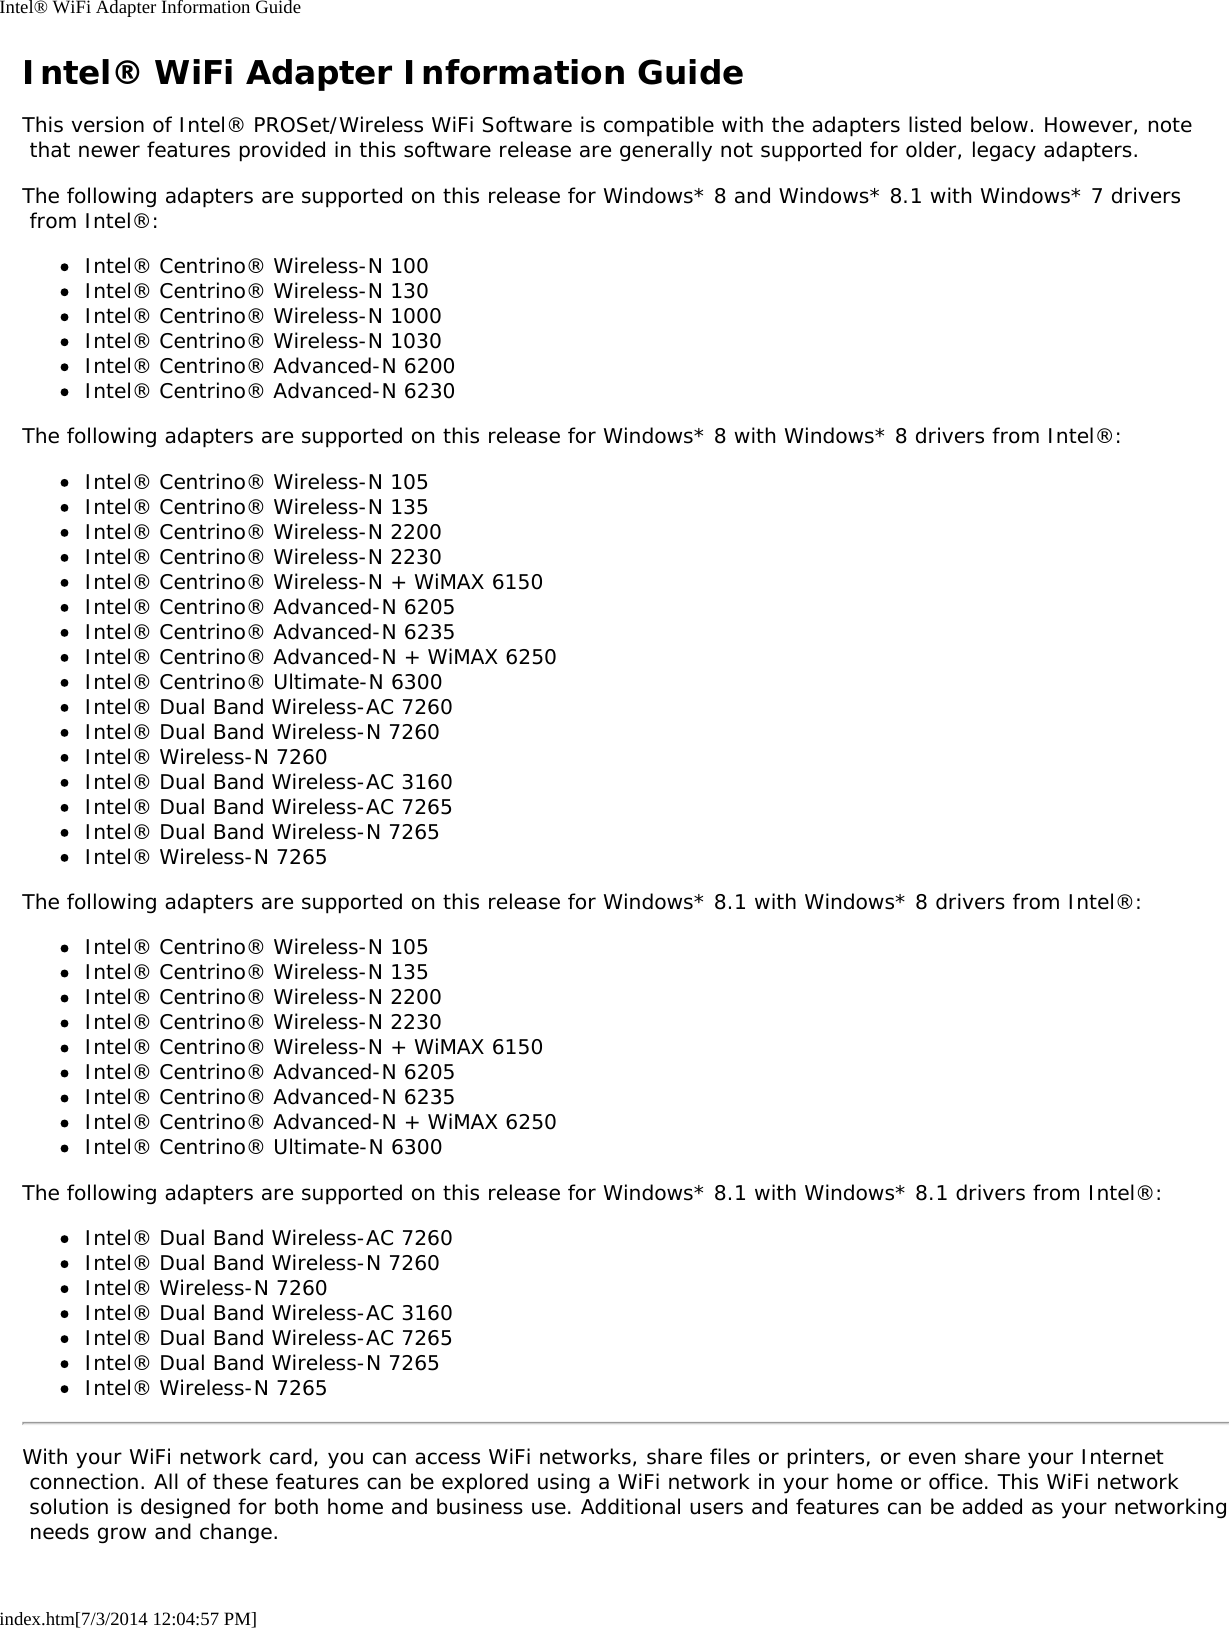 Intel® WiFi Adapter Information Guideindex.htm[7/3/2014 12:04:57 PM]Intel® WiFi Adapter Information GuideThis version of Intel® PROSet/Wireless WiFi Software is compatible with the adapters listed below. However, note that newer features provided in this software release are generally not supported for older, legacy adapters.The following adapters are supported on this release for Windows* 8 and Windows* 8.1 with Windows* 7 drivers from Intel®:Intel® Centrino® Wireless-N 100Intel® Centrino® Wireless-N 130Intel® Centrino® Wireless-N 1000Intel® Centrino® Wireless-N 1030Intel® Centrino® Advanced-N 6200Intel® Centrino® Advanced-N 6230The following adapters are supported on this release for Windows* 8 with Windows* 8 drivers from Intel®:Intel® Centrino® Wireless-N 105Intel® Centrino® Wireless-N 135Intel® Centrino® Wireless-N 2200Intel® Centrino® Wireless-N 2230Intel® Centrino® Wireless-N + WiMAX 6150Intel® Centrino® Advanced-N 6205Intel® Centrino® Advanced-N 6235Intel® Centrino® Advanced-N + WiMAX 6250Intel® Centrino® Ultimate-N 6300Intel® Dual Band Wireless-AC 7260Intel® Dual Band Wireless-N 7260Intel® Wireless-N 7260Intel® Dual Band Wireless-AC 3160Intel® Dual Band Wireless-AC 7265Intel® Dual Band Wireless-N 7265Intel® Wireless-N 7265The following adapters are supported on this release for Windows* 8.1 with Windows* 8 drivers from Intel®:Intel® Centrino® Wireless-N 105Intel® Centrino® Wireless-N 135Intel® Centrino® Wireless-N 2200Intel® Centrino® Wireless-N 2230Intel® Centrino® Wireless-N + WiMAX 6150Intel® Centrino® Advanced-N 6205Intel® Centrino® Advanced-N 6235Intel® Centrino® Advanced-N + WiMAX 6250Intel® Centrino® Ultimate-N 6300The following adapters are supported on this release for Windows* 8.1 with Windows* 8.1 drivers from Intel®:Intel® Dual Band Wireless-AC 7260Intel® Dual Band Wireless-N 7260Intel® Wireless-N 7260Intel® Dual Band Wireless-AC 3160Intel® Dual Band Wireless-AC 7265Intel® Dual Band Wireless-N 7265Intel® Wireless-N 7265With your WiFi network card, you can access WiFi networks, share files or printers, or even share your Internet connection. All of these features can be explored using a WiFi network in your home or office. This WiFi network solution is designed for both home and business use. Additional users and features can be added as your networking needs grow and change.